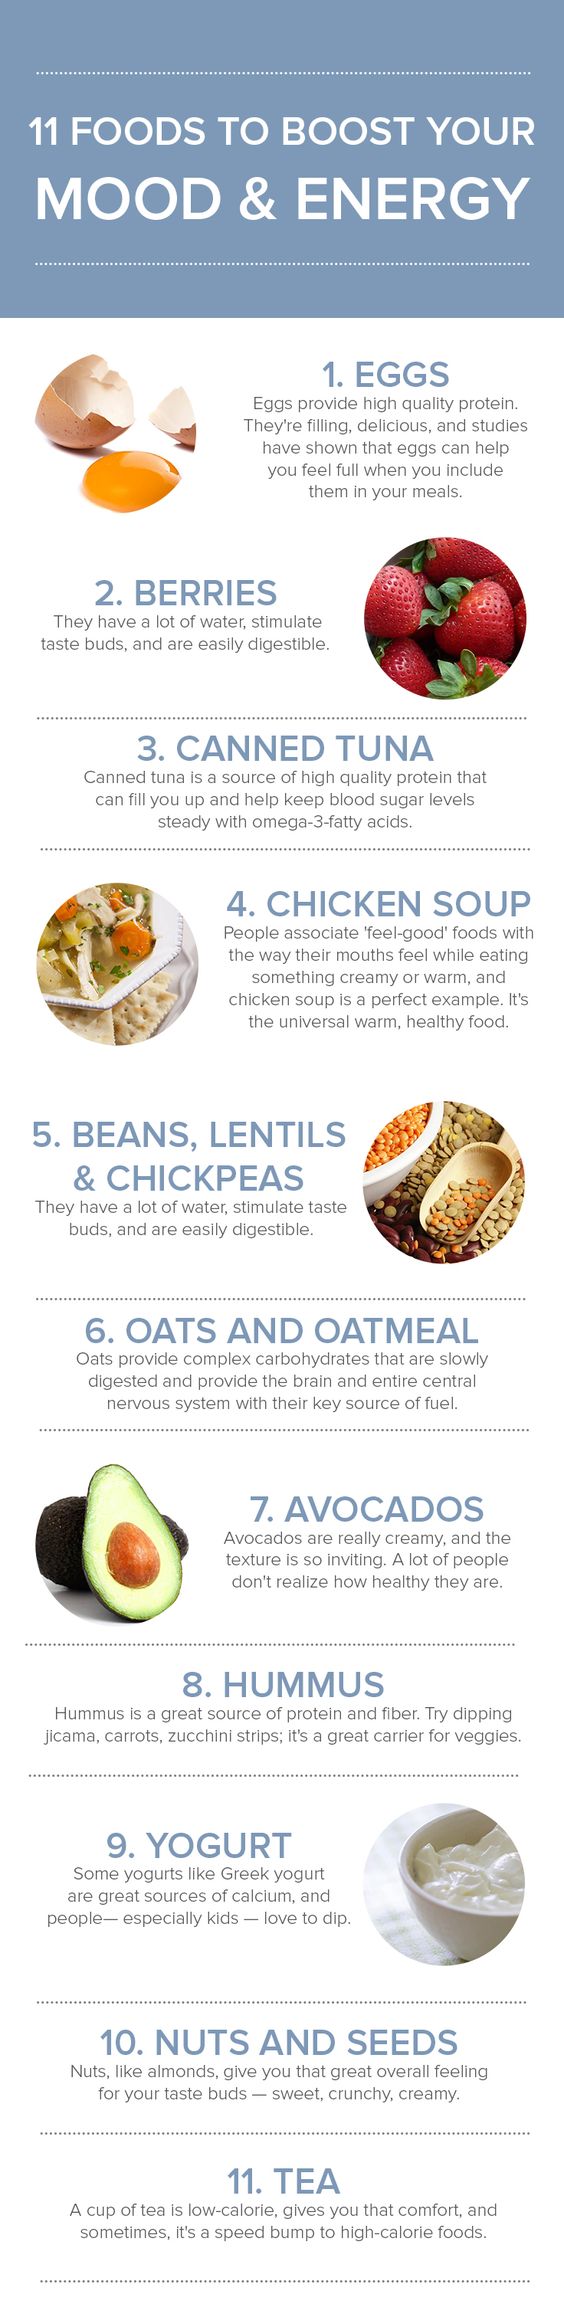 11 foods to boost your mood & energy